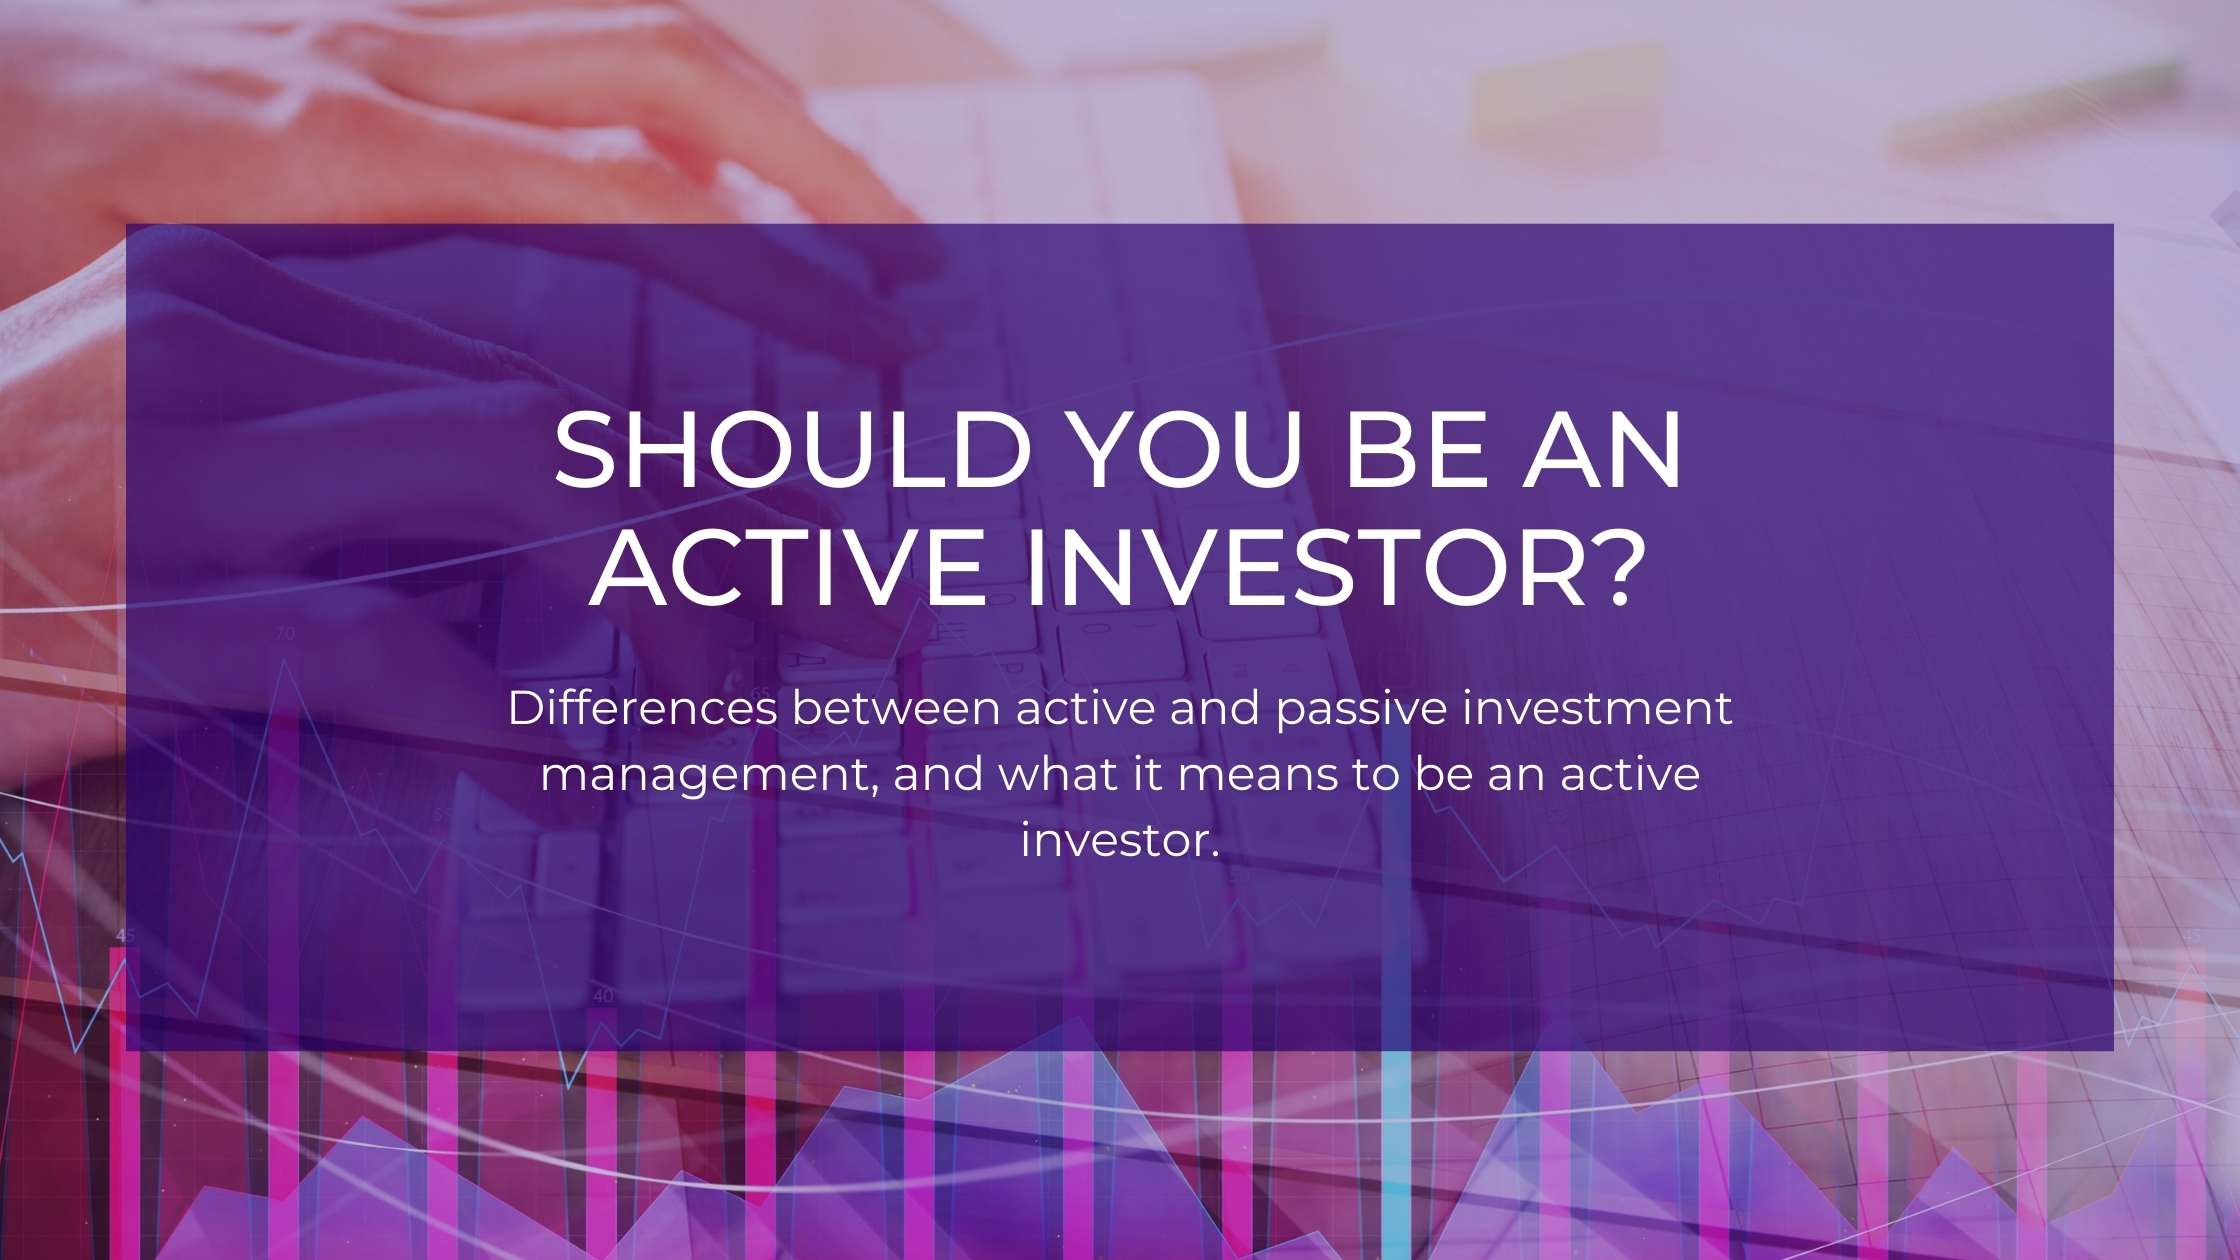 SHOULD YOU BE AN ACTIVE INVESTOR